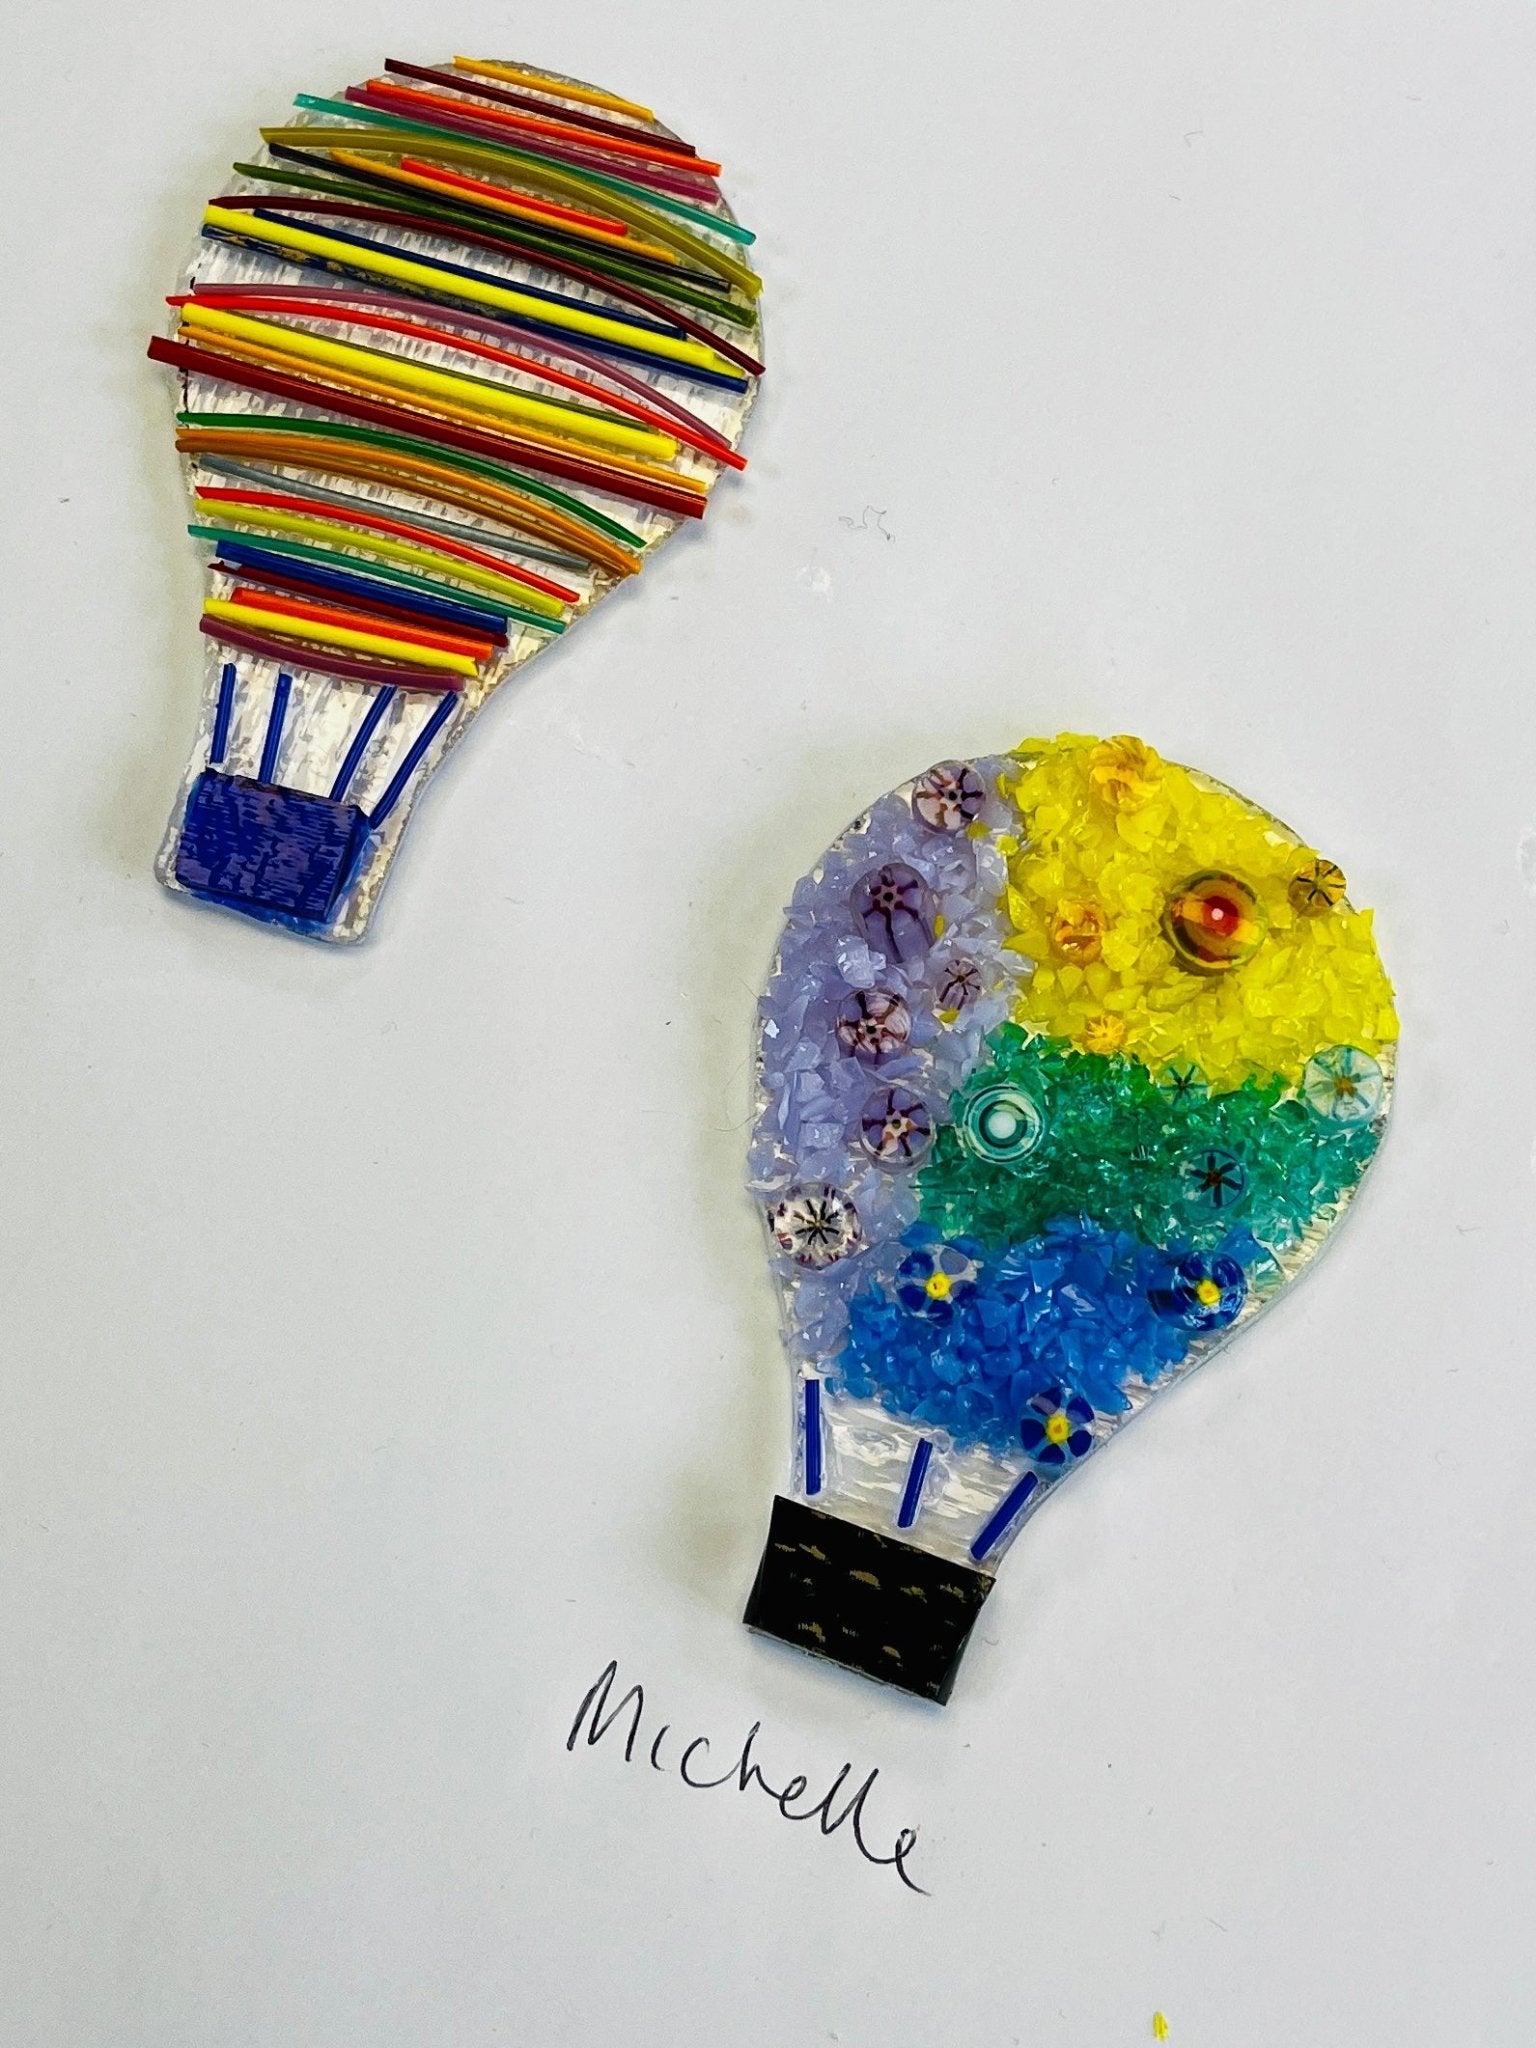 Fused glass Hot Air Balloon workshop Saturday 15th June 10.30 - 12.00 - Forever After Collective